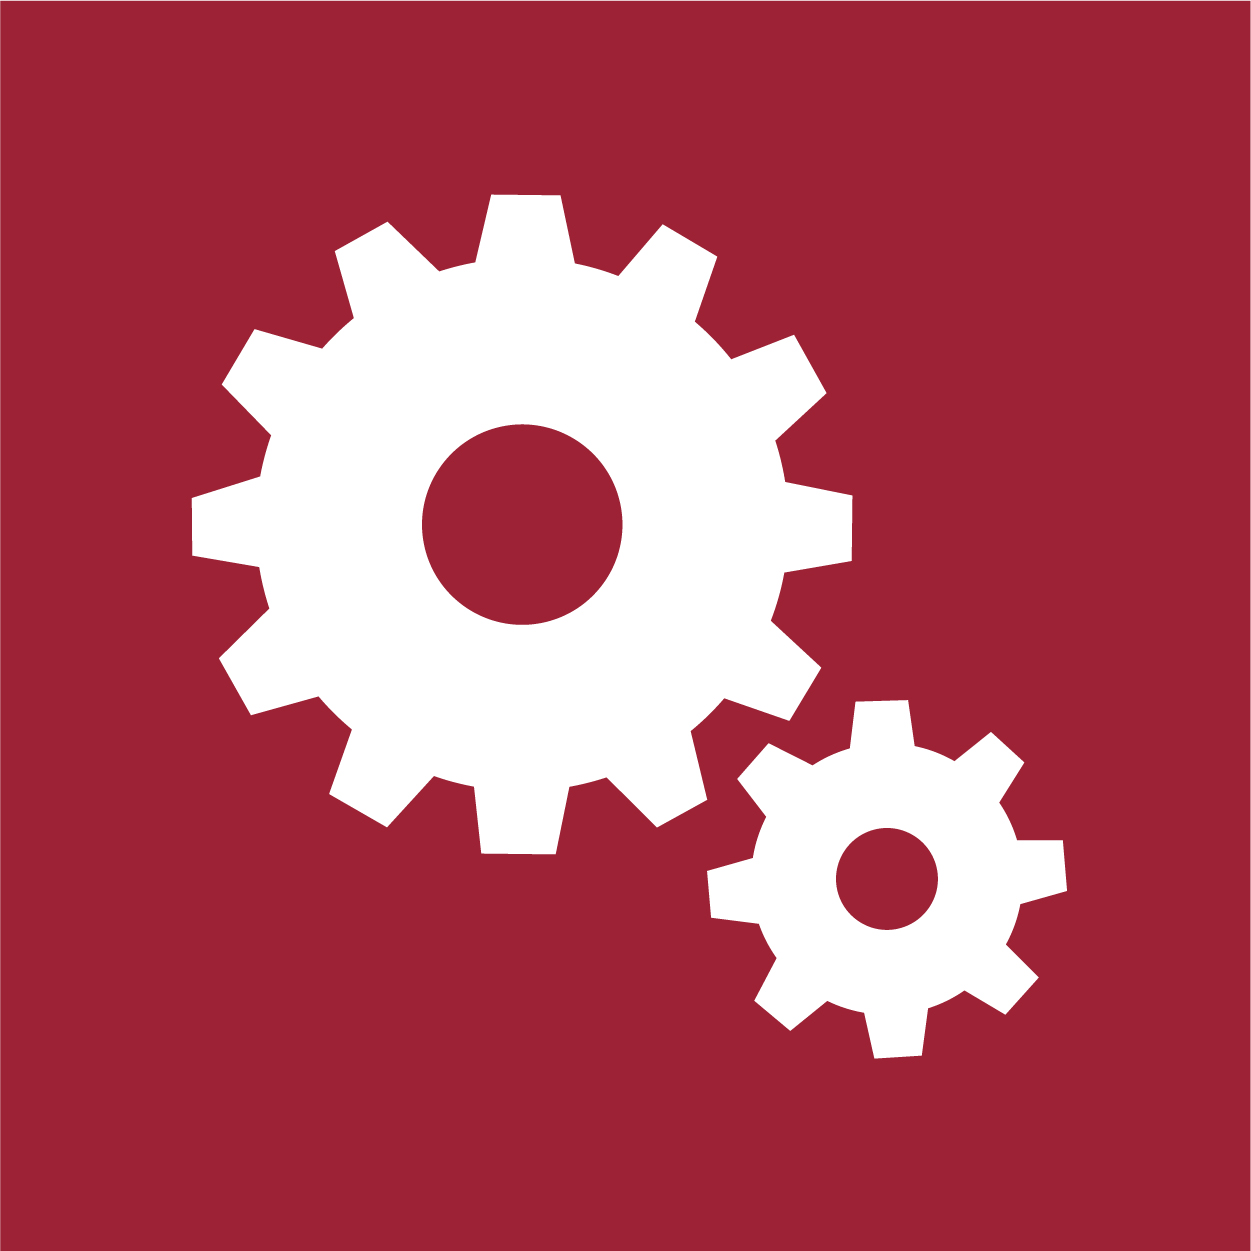 icon depicting two gears